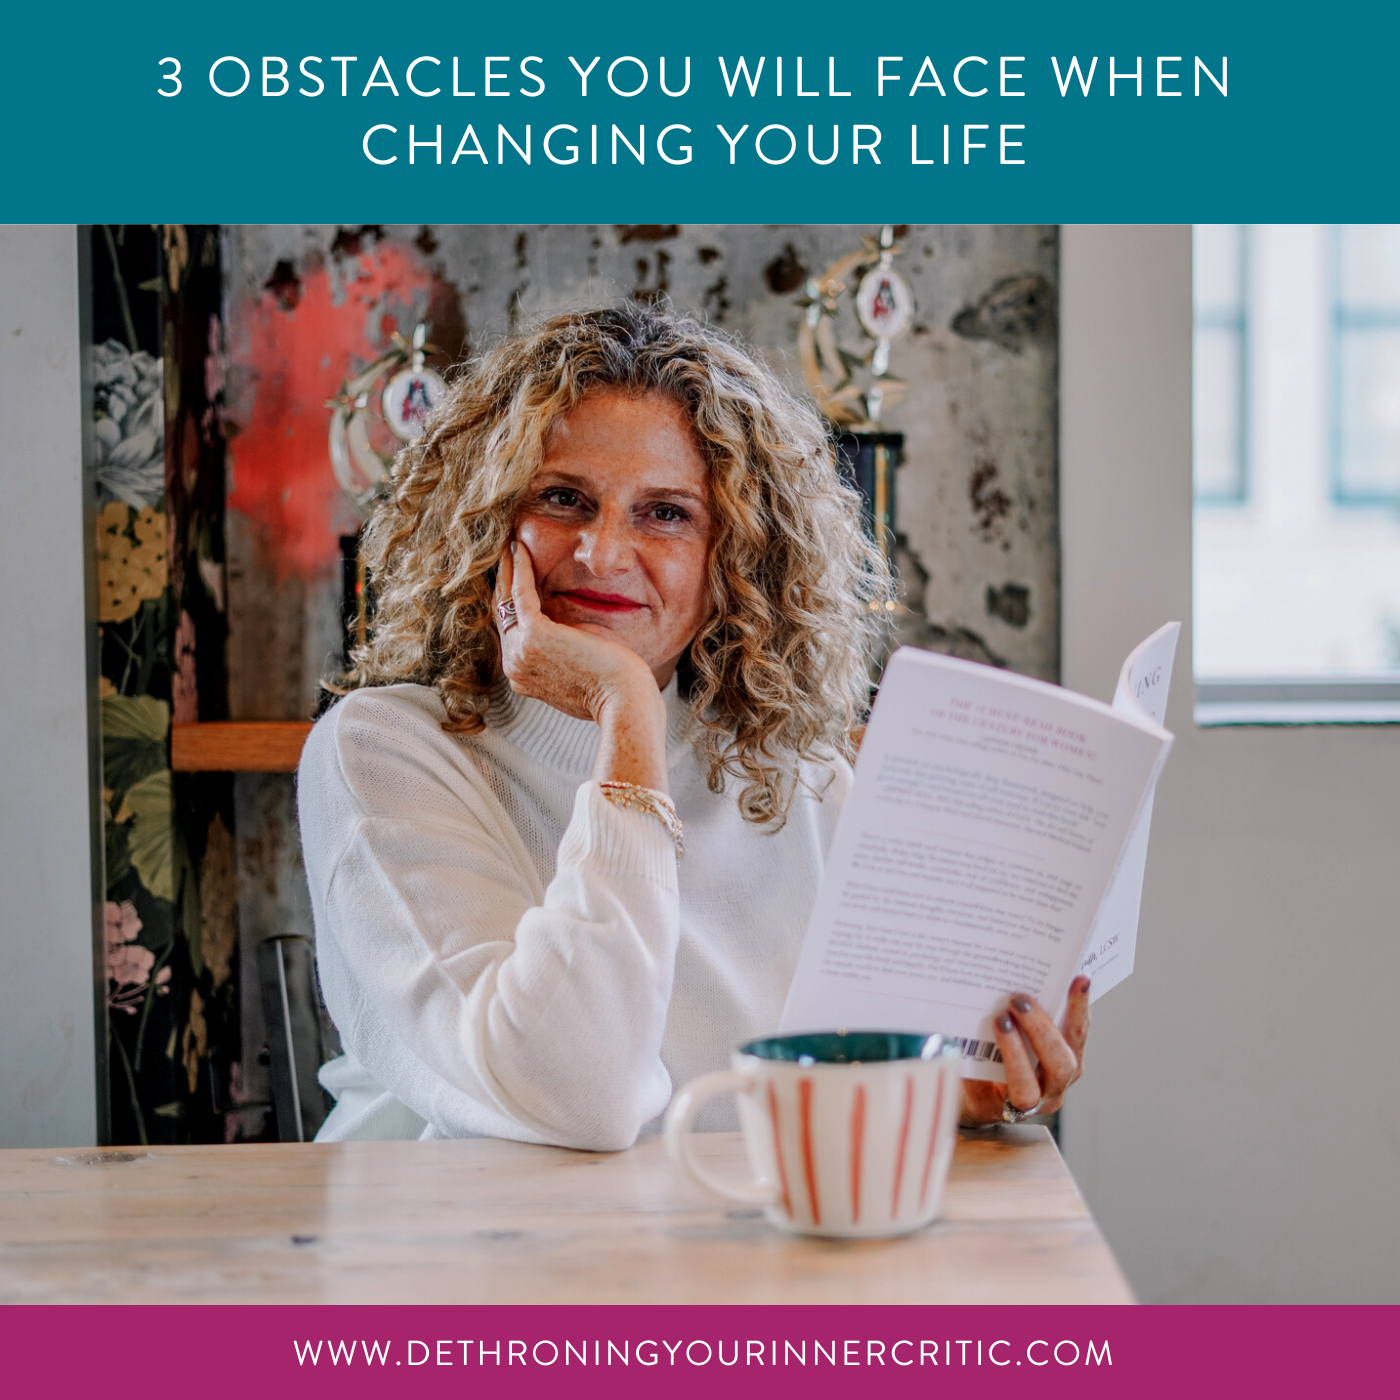 3 OBSTACLES YOU WILL FACE WHEN CHANGING YOUR LIFE